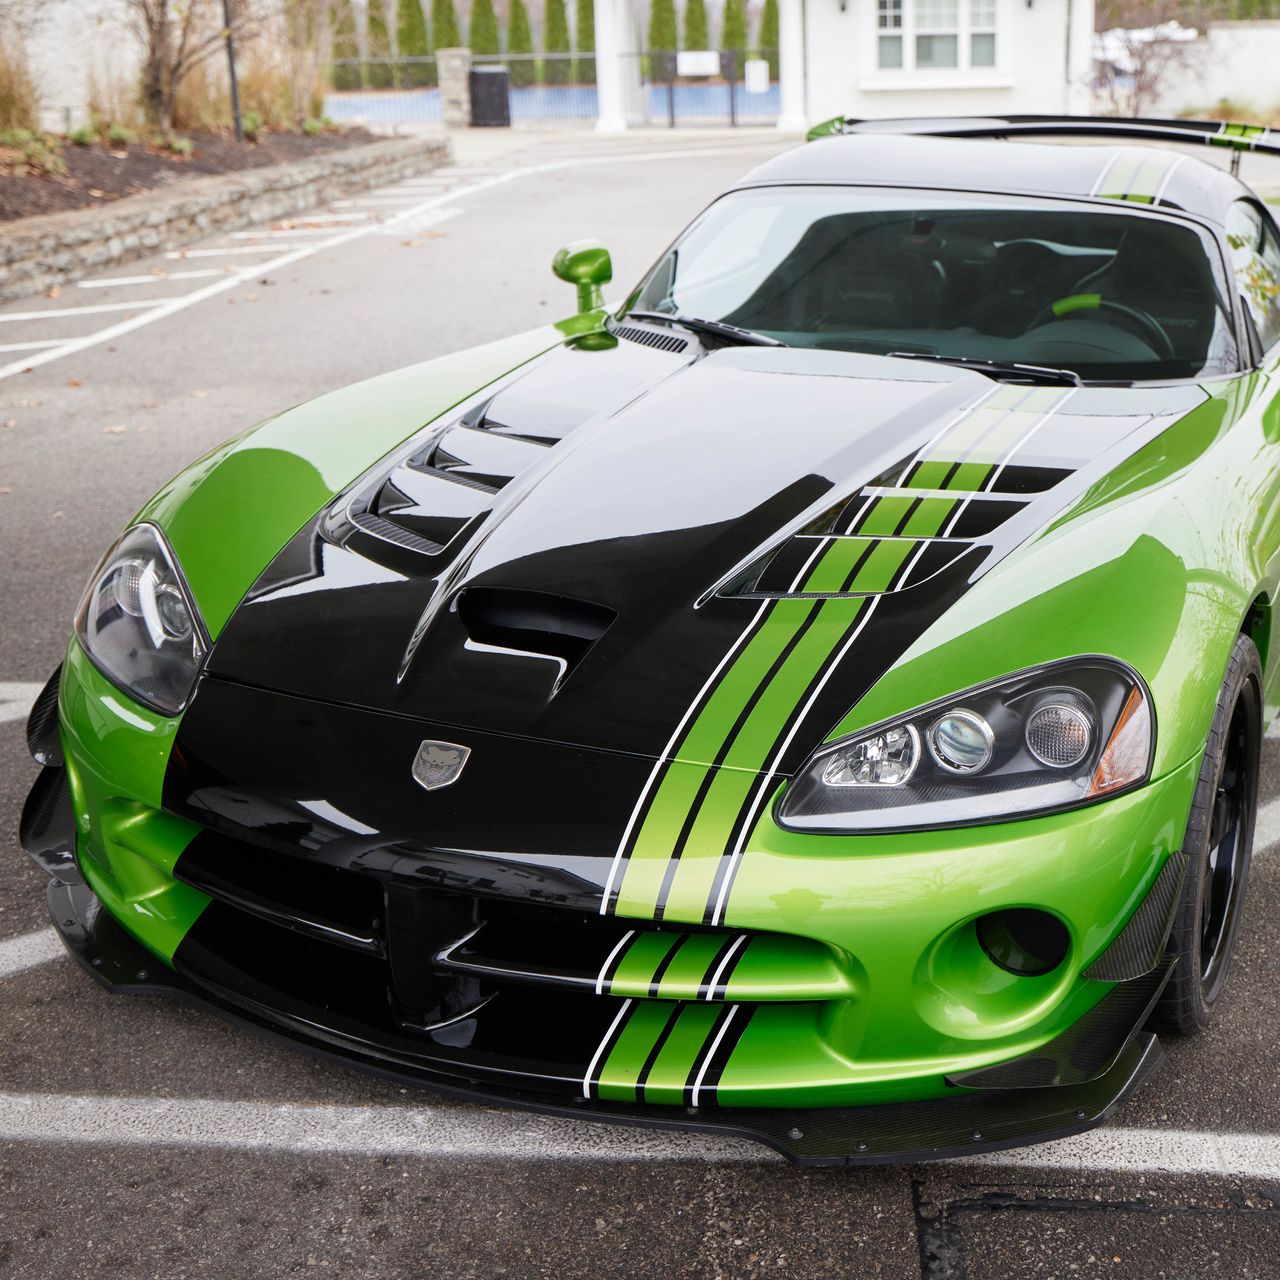 His Dodge Viper Is an Apex Predator on the Road - WSJ